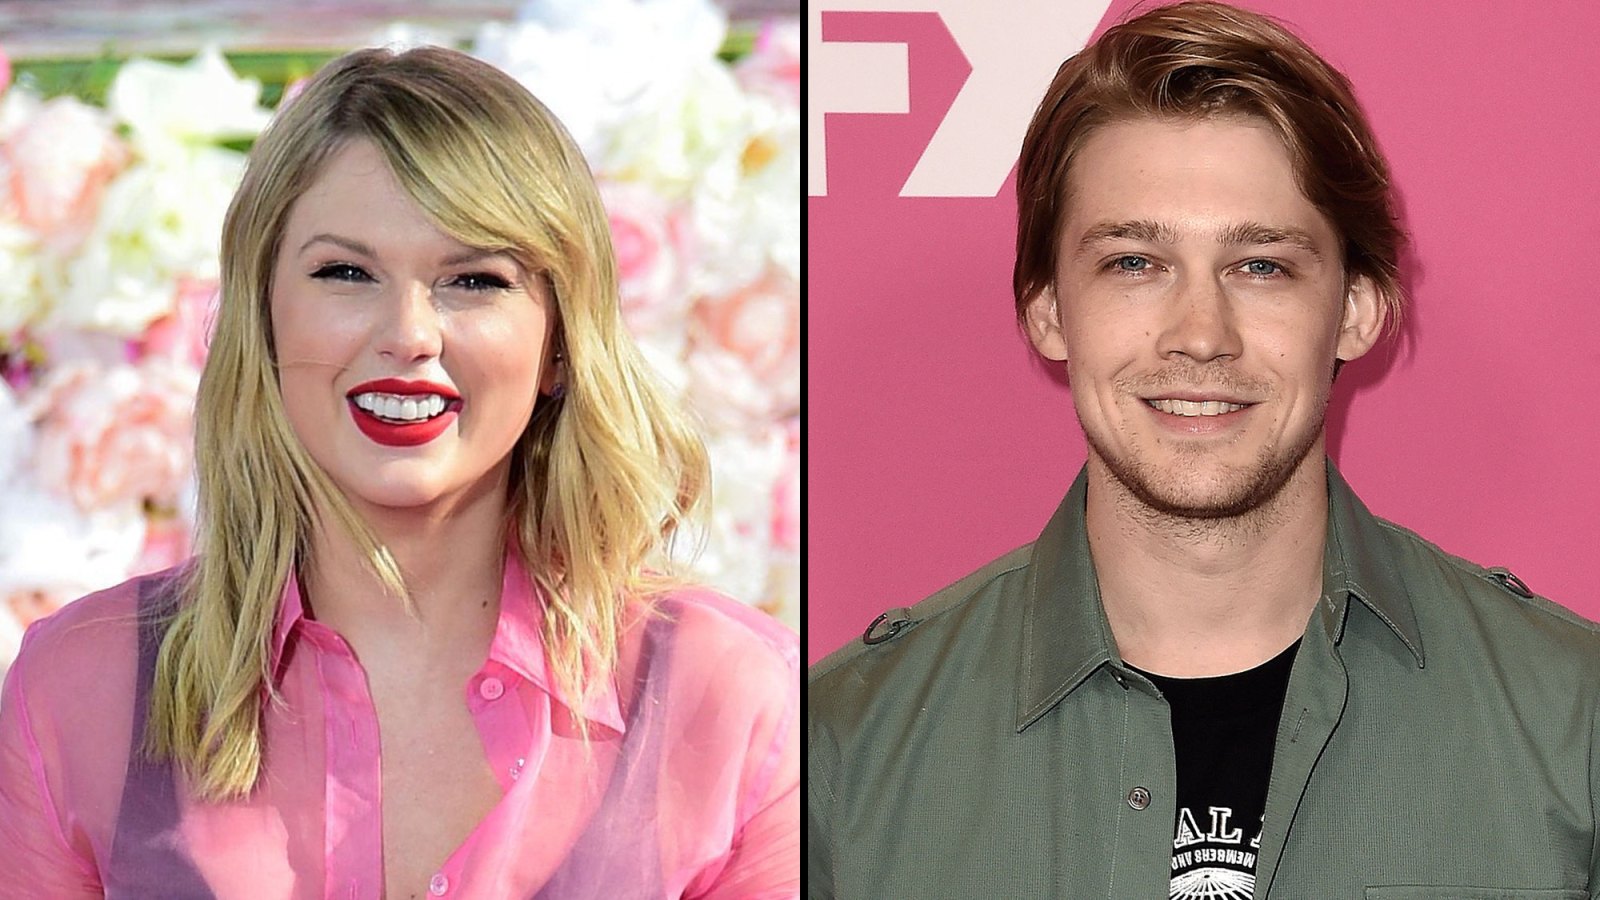 Taylor Swift Explains Why Her Relationship With Boyfriend Joe Alwyn 'Isn't Up for Discussion'